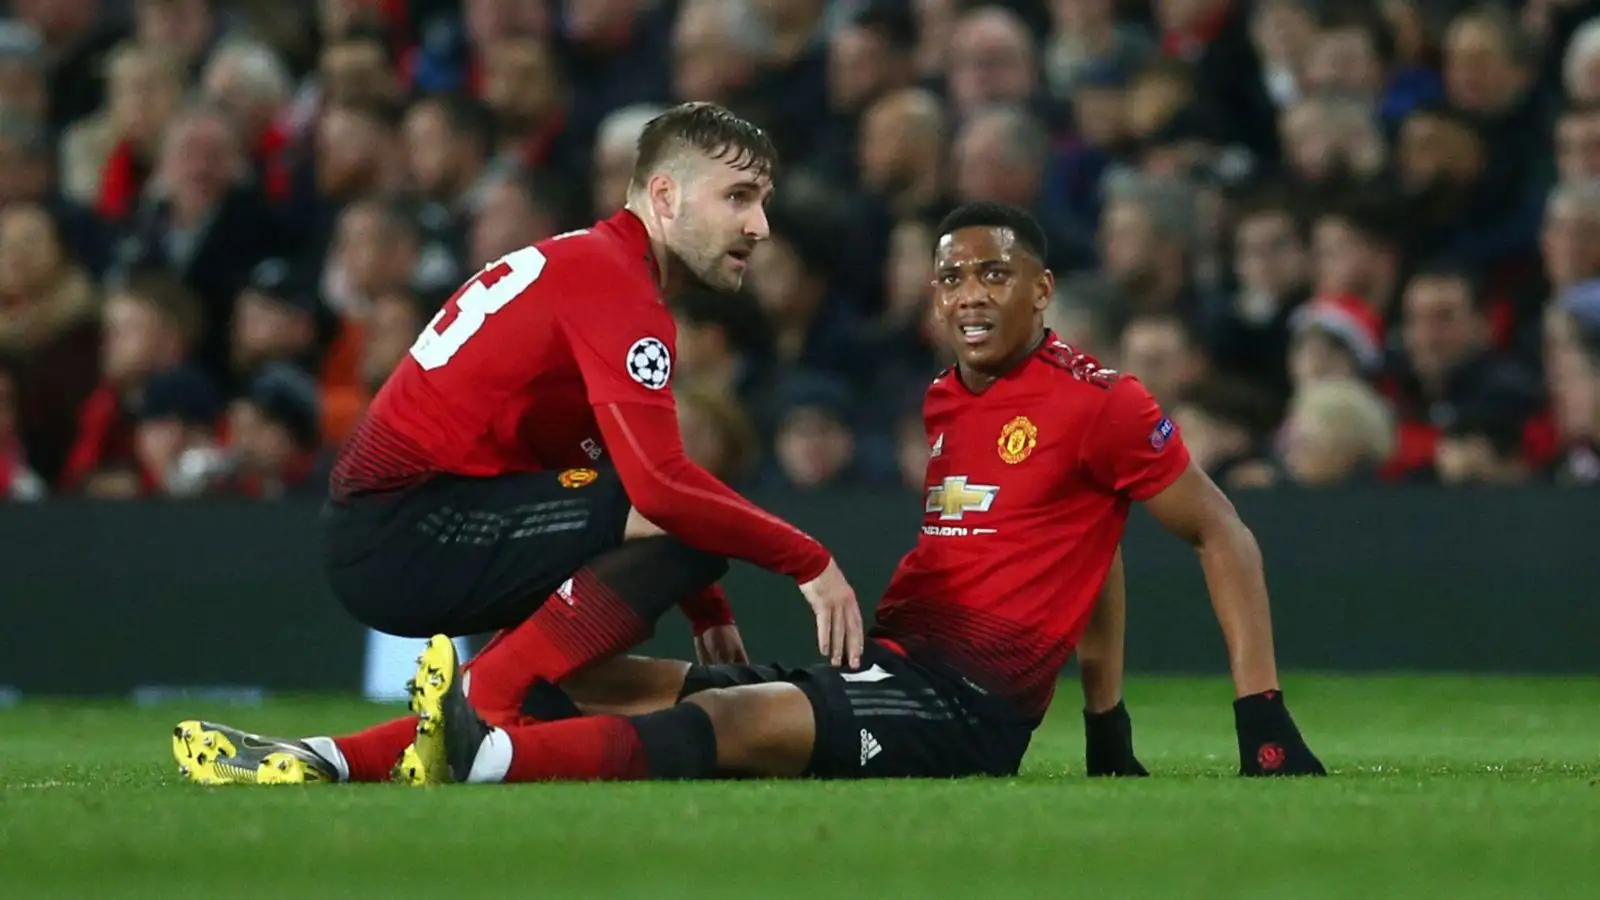 Man Utd duo Luke Shaw and also Anthony Martial